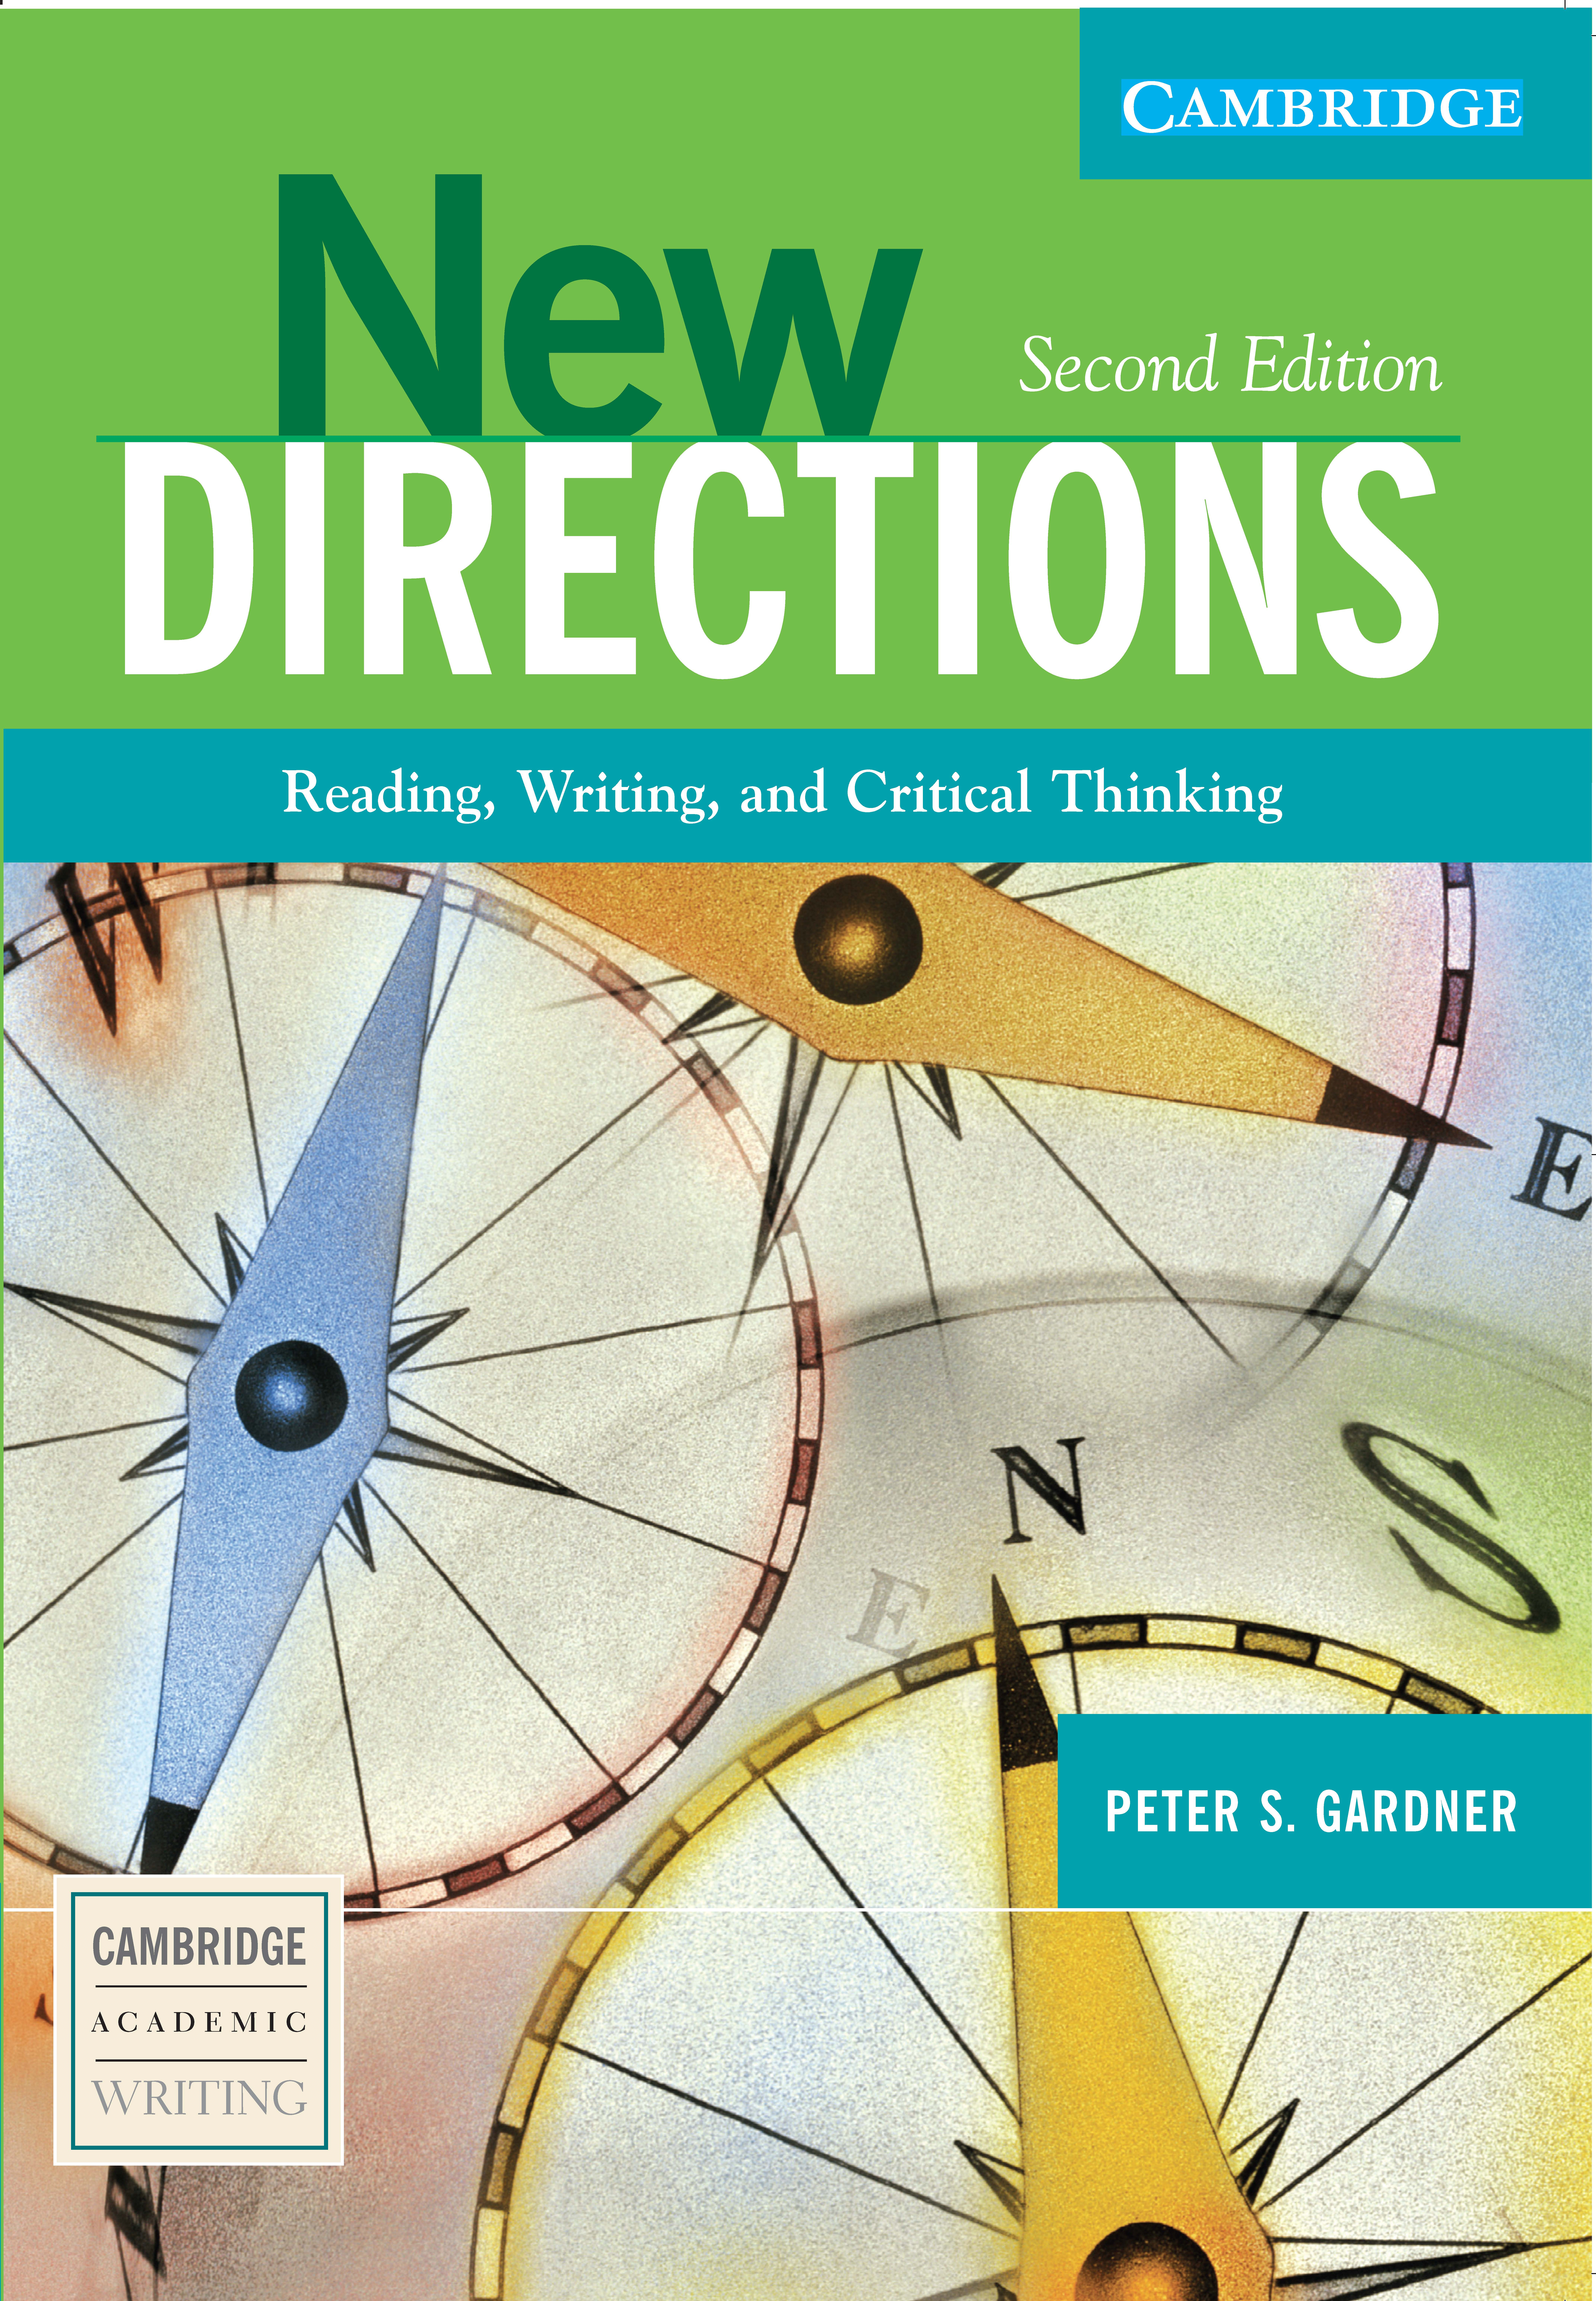 New Directions Second Edition